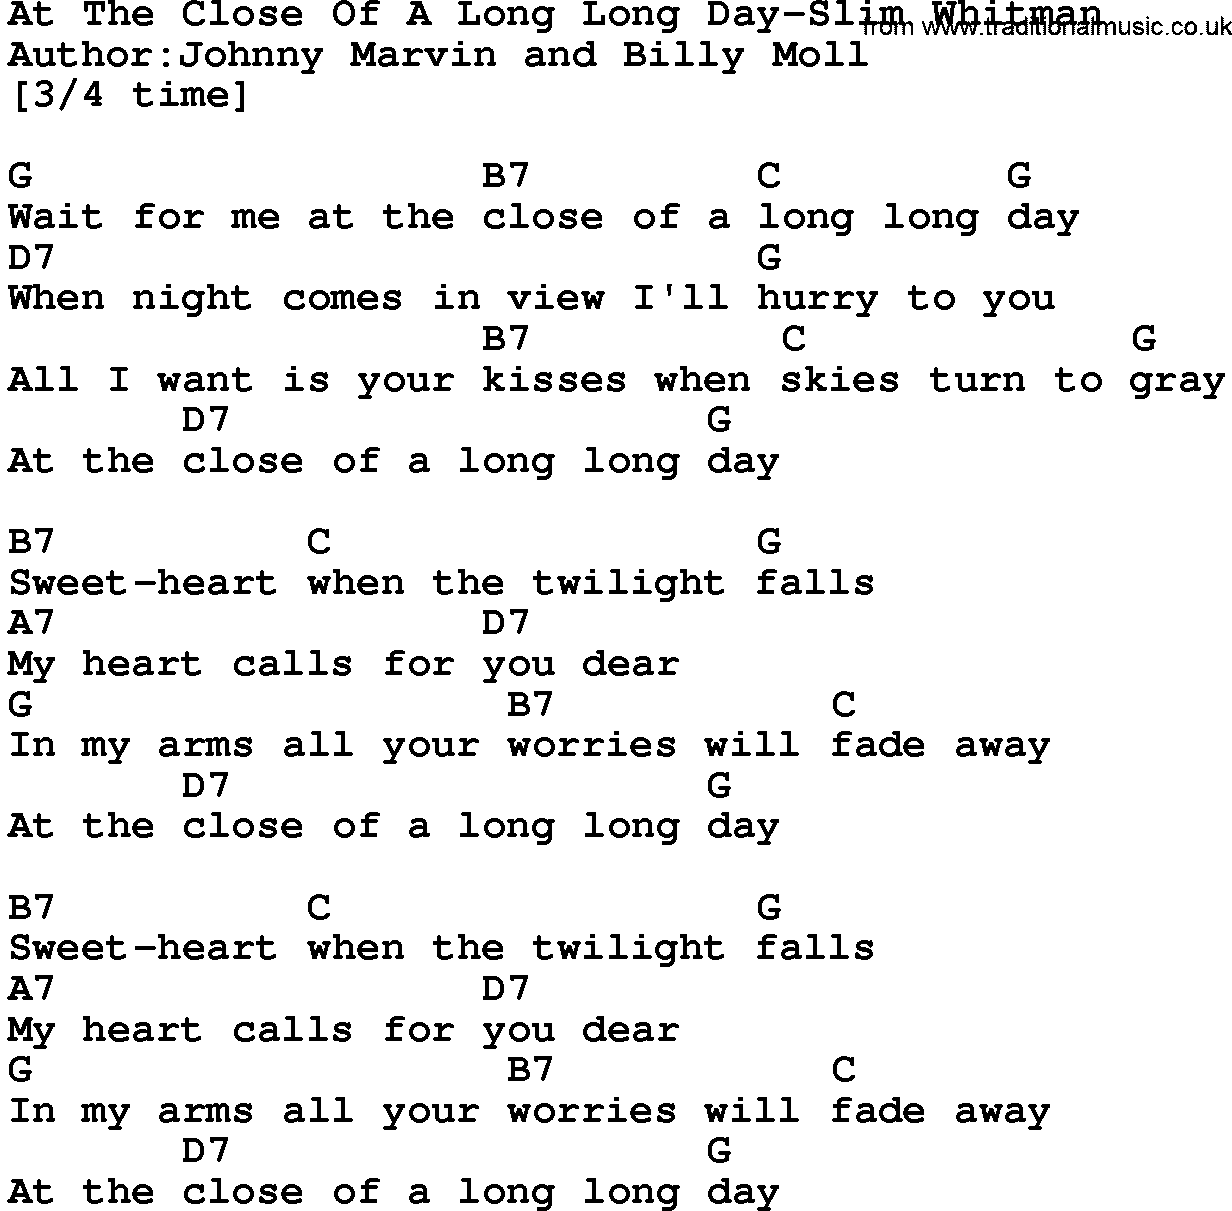 Country music song: At The Close Of A Long Long Day-Slim Whitman lyrics and chords